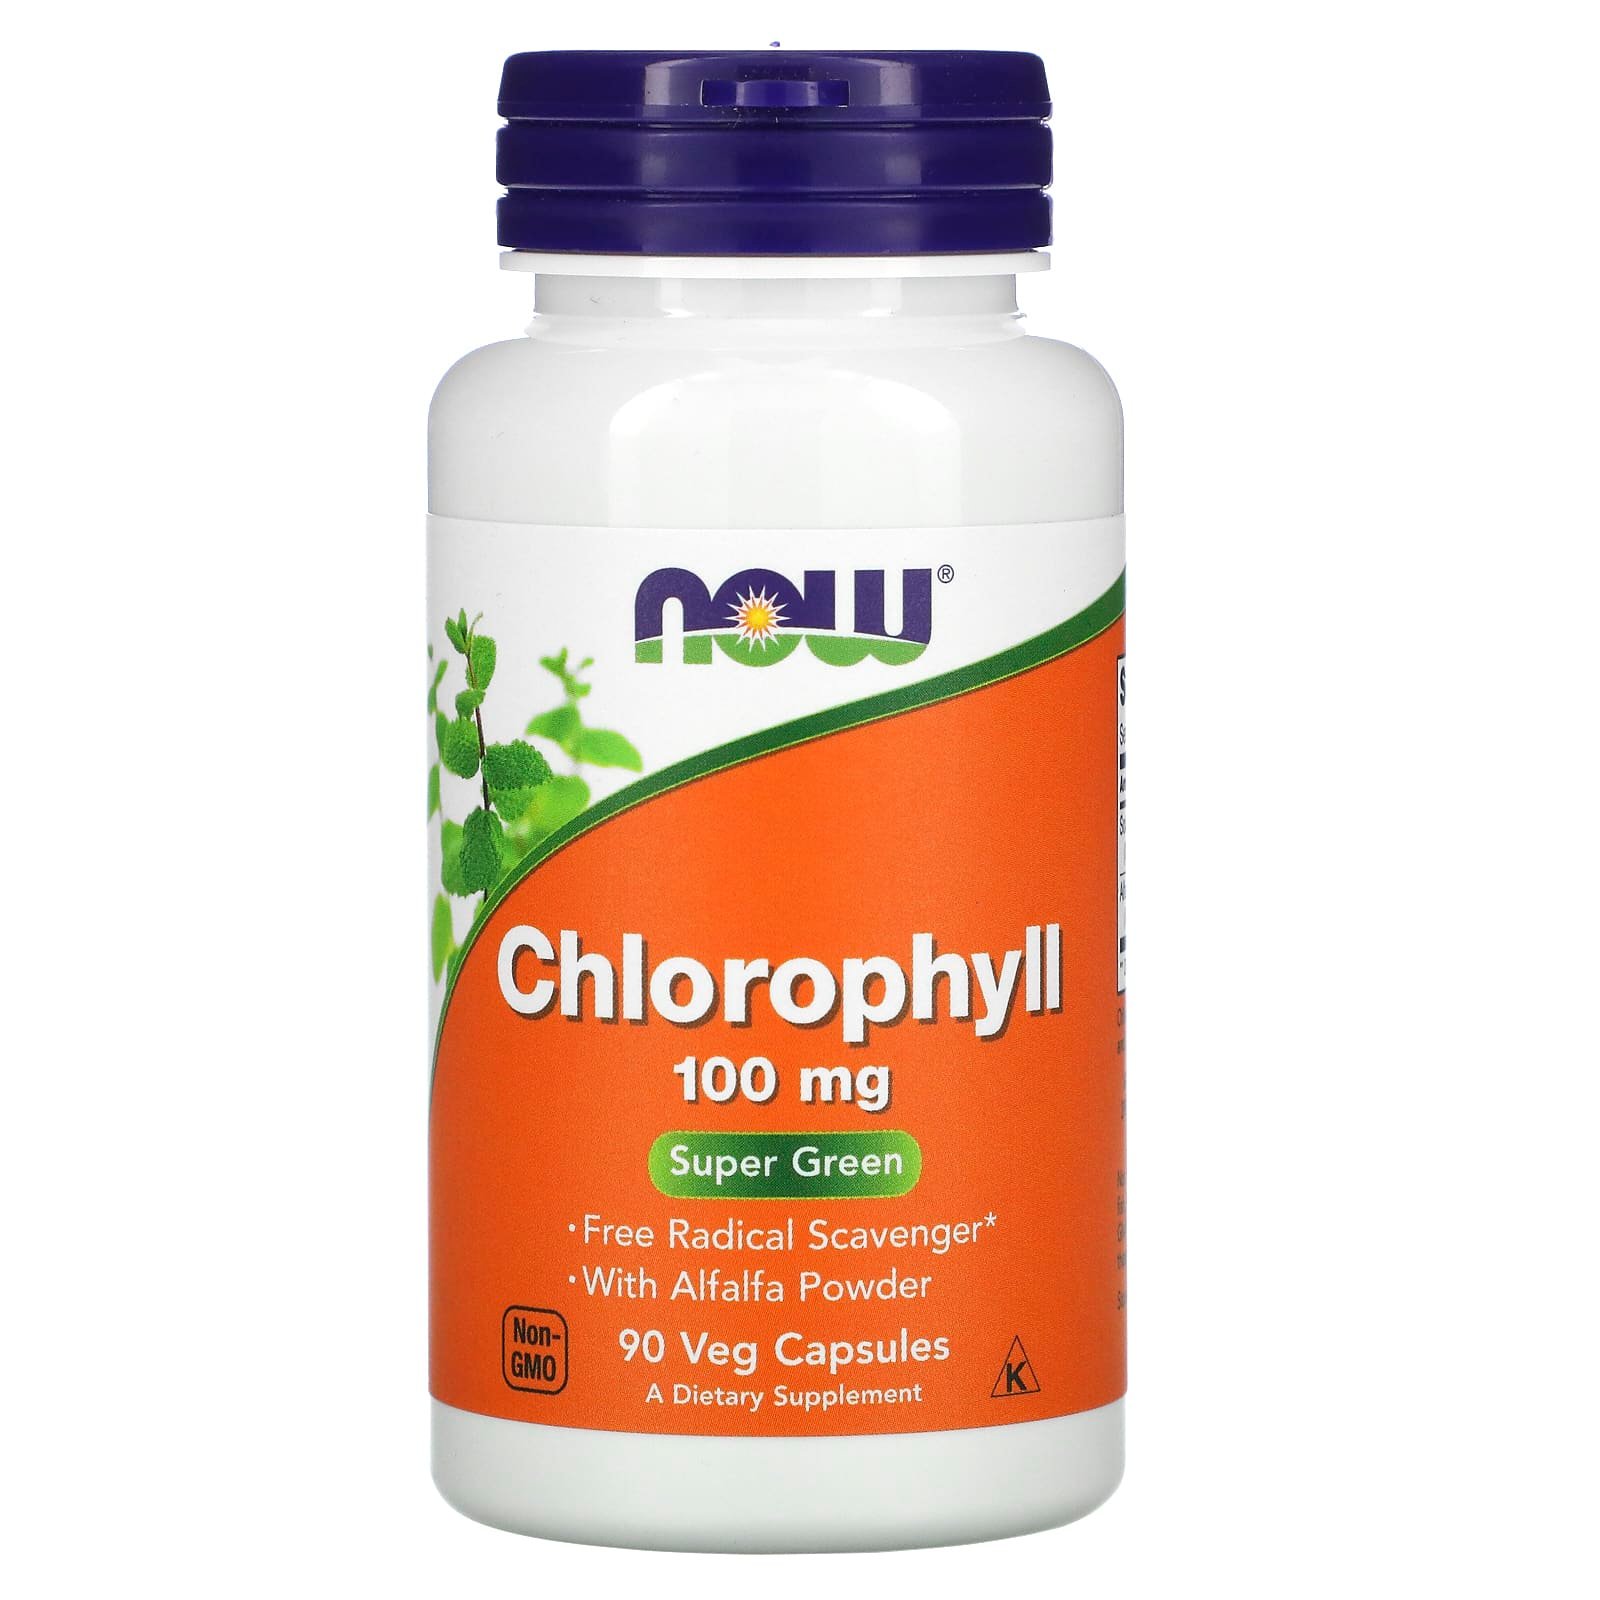 Now Foods Chlorophyl Detox Cleansing Capsules 100 Mg - 90 Capsules